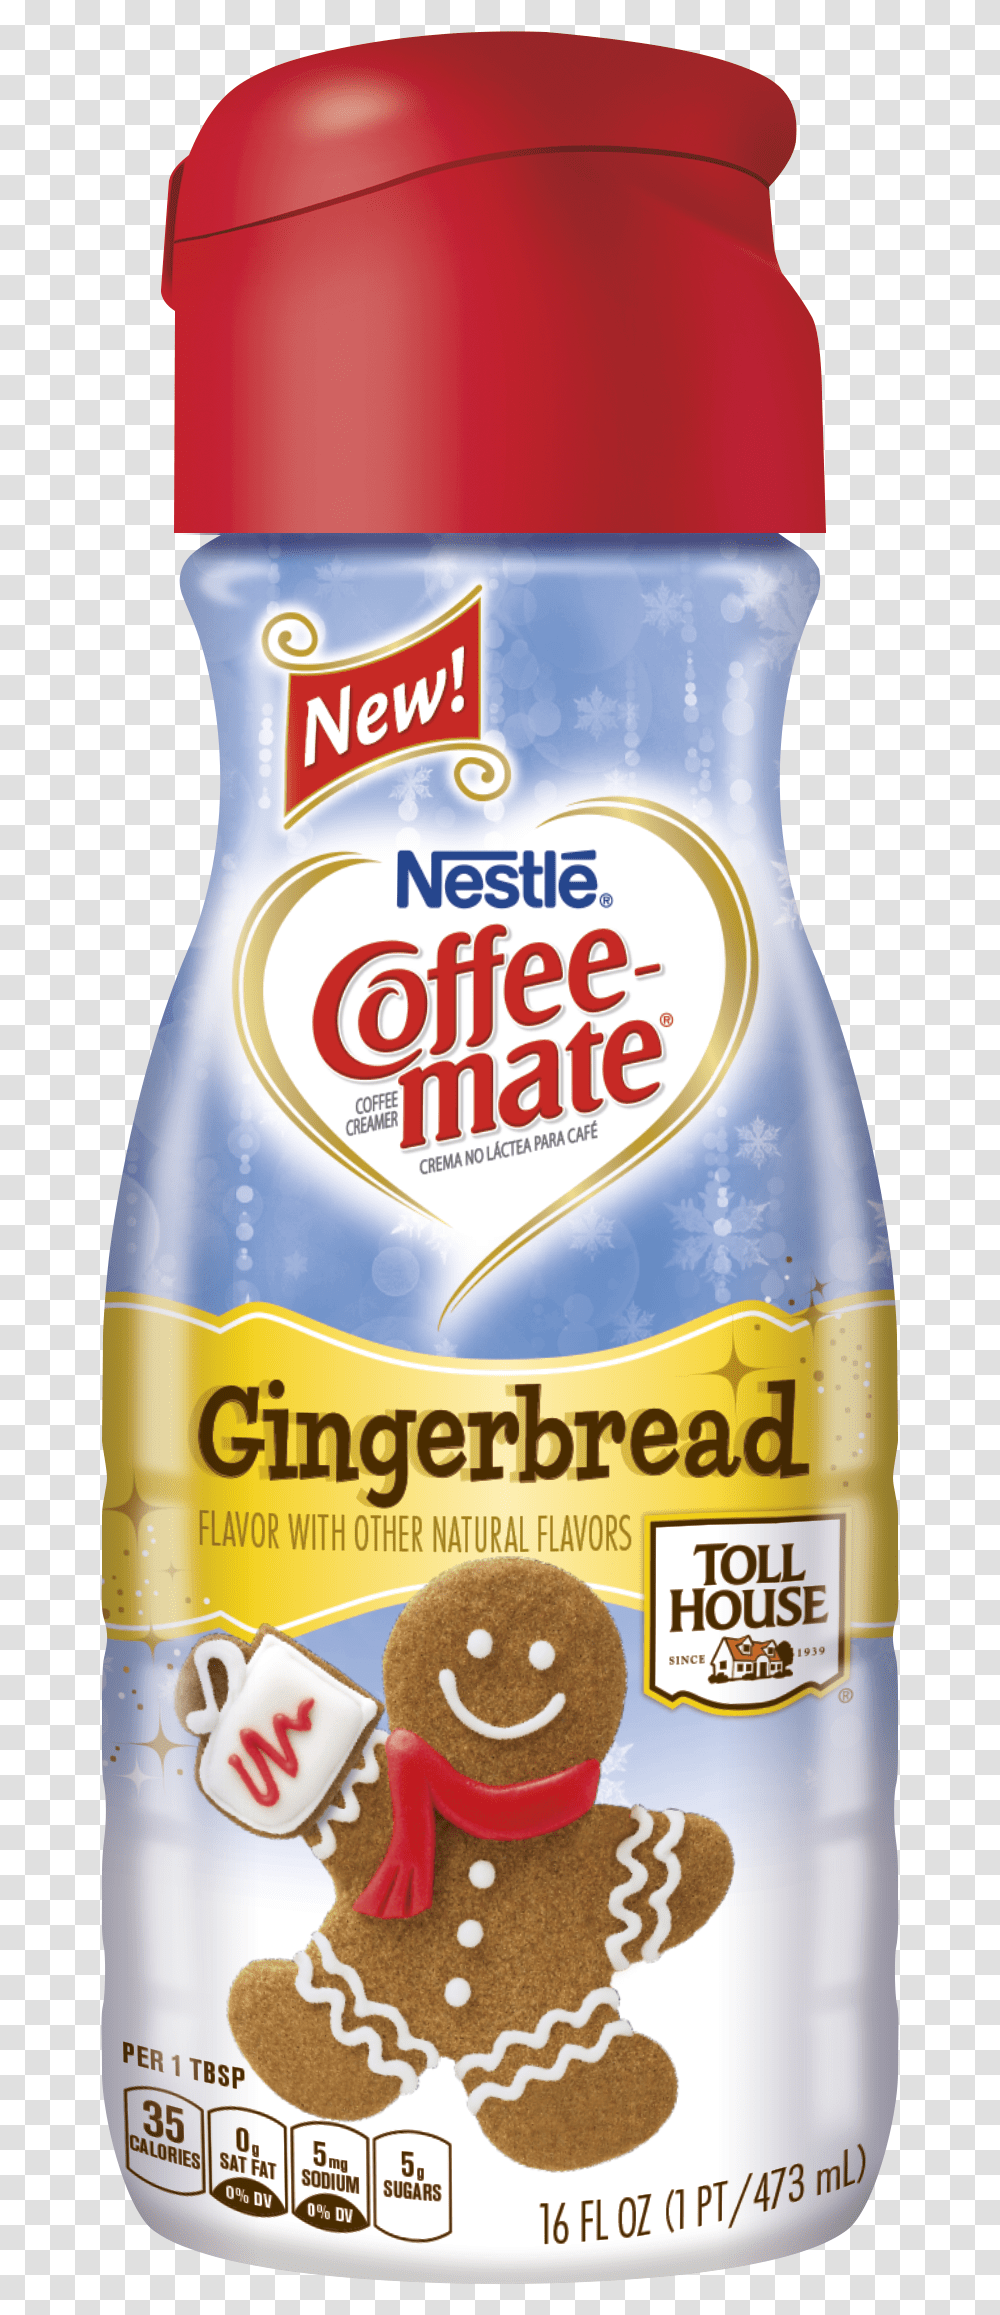 Image Nestle Coffee Mate Gingerbread 16 Oz, Bottle, Sunscreen, Cosmetics, Label Transparent Png